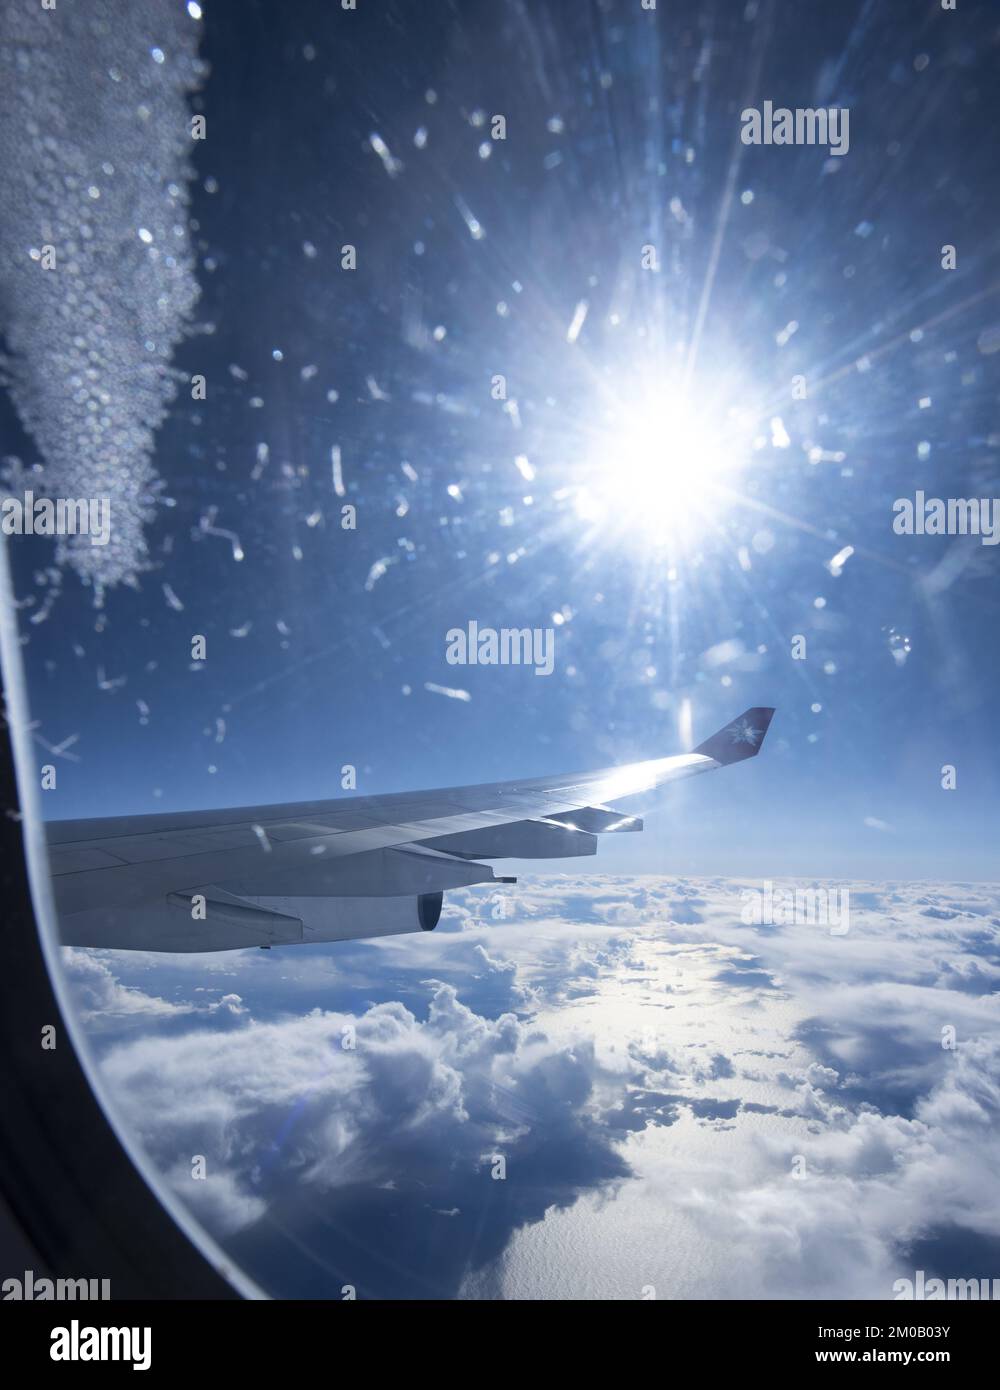 A Close-Up Of Airplane Wing Against Blue Sky and white clouds Stock Photo